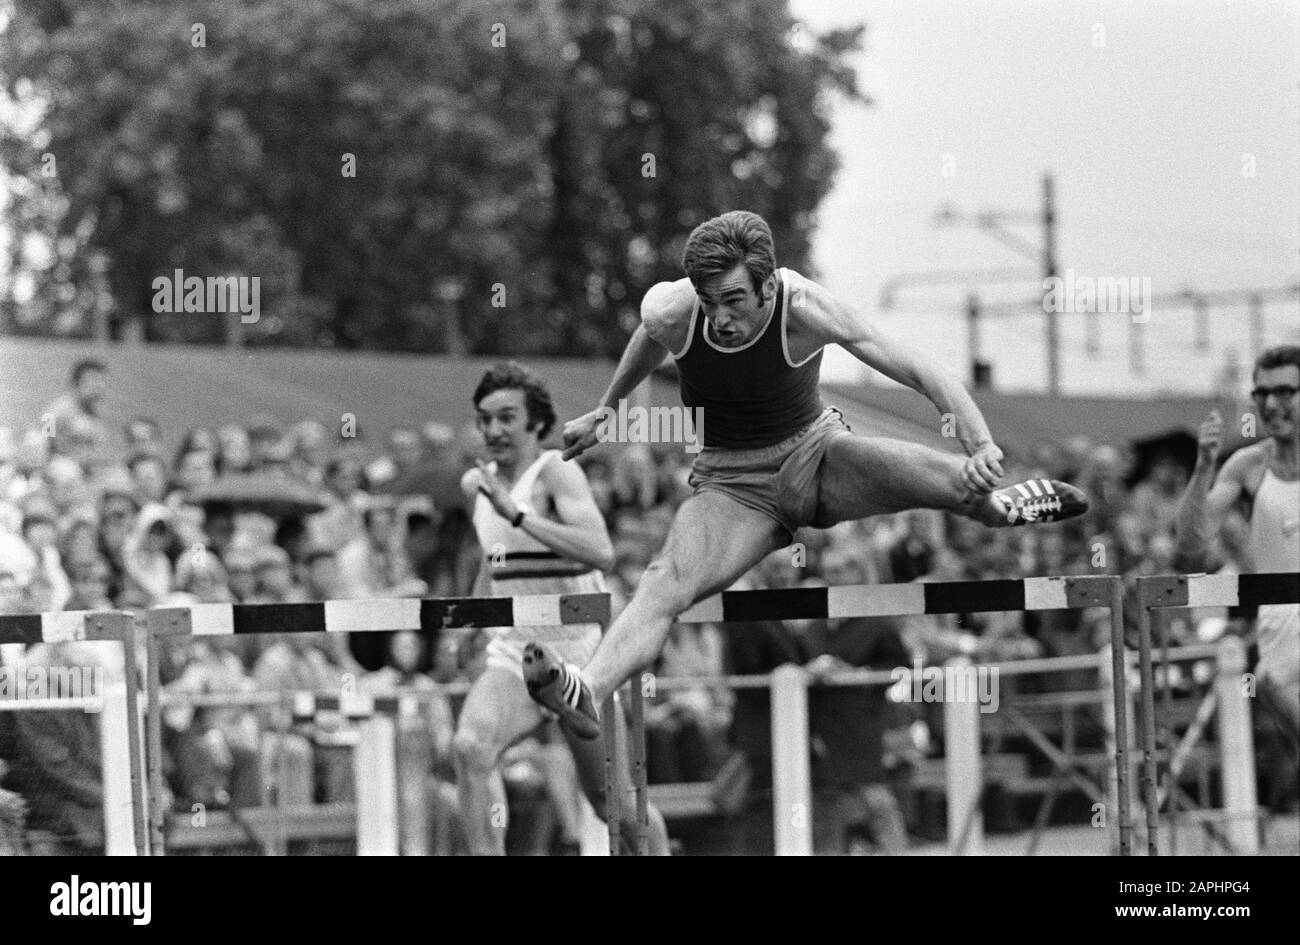 Hurdler Black and White Stock Photos & Images - Alamy